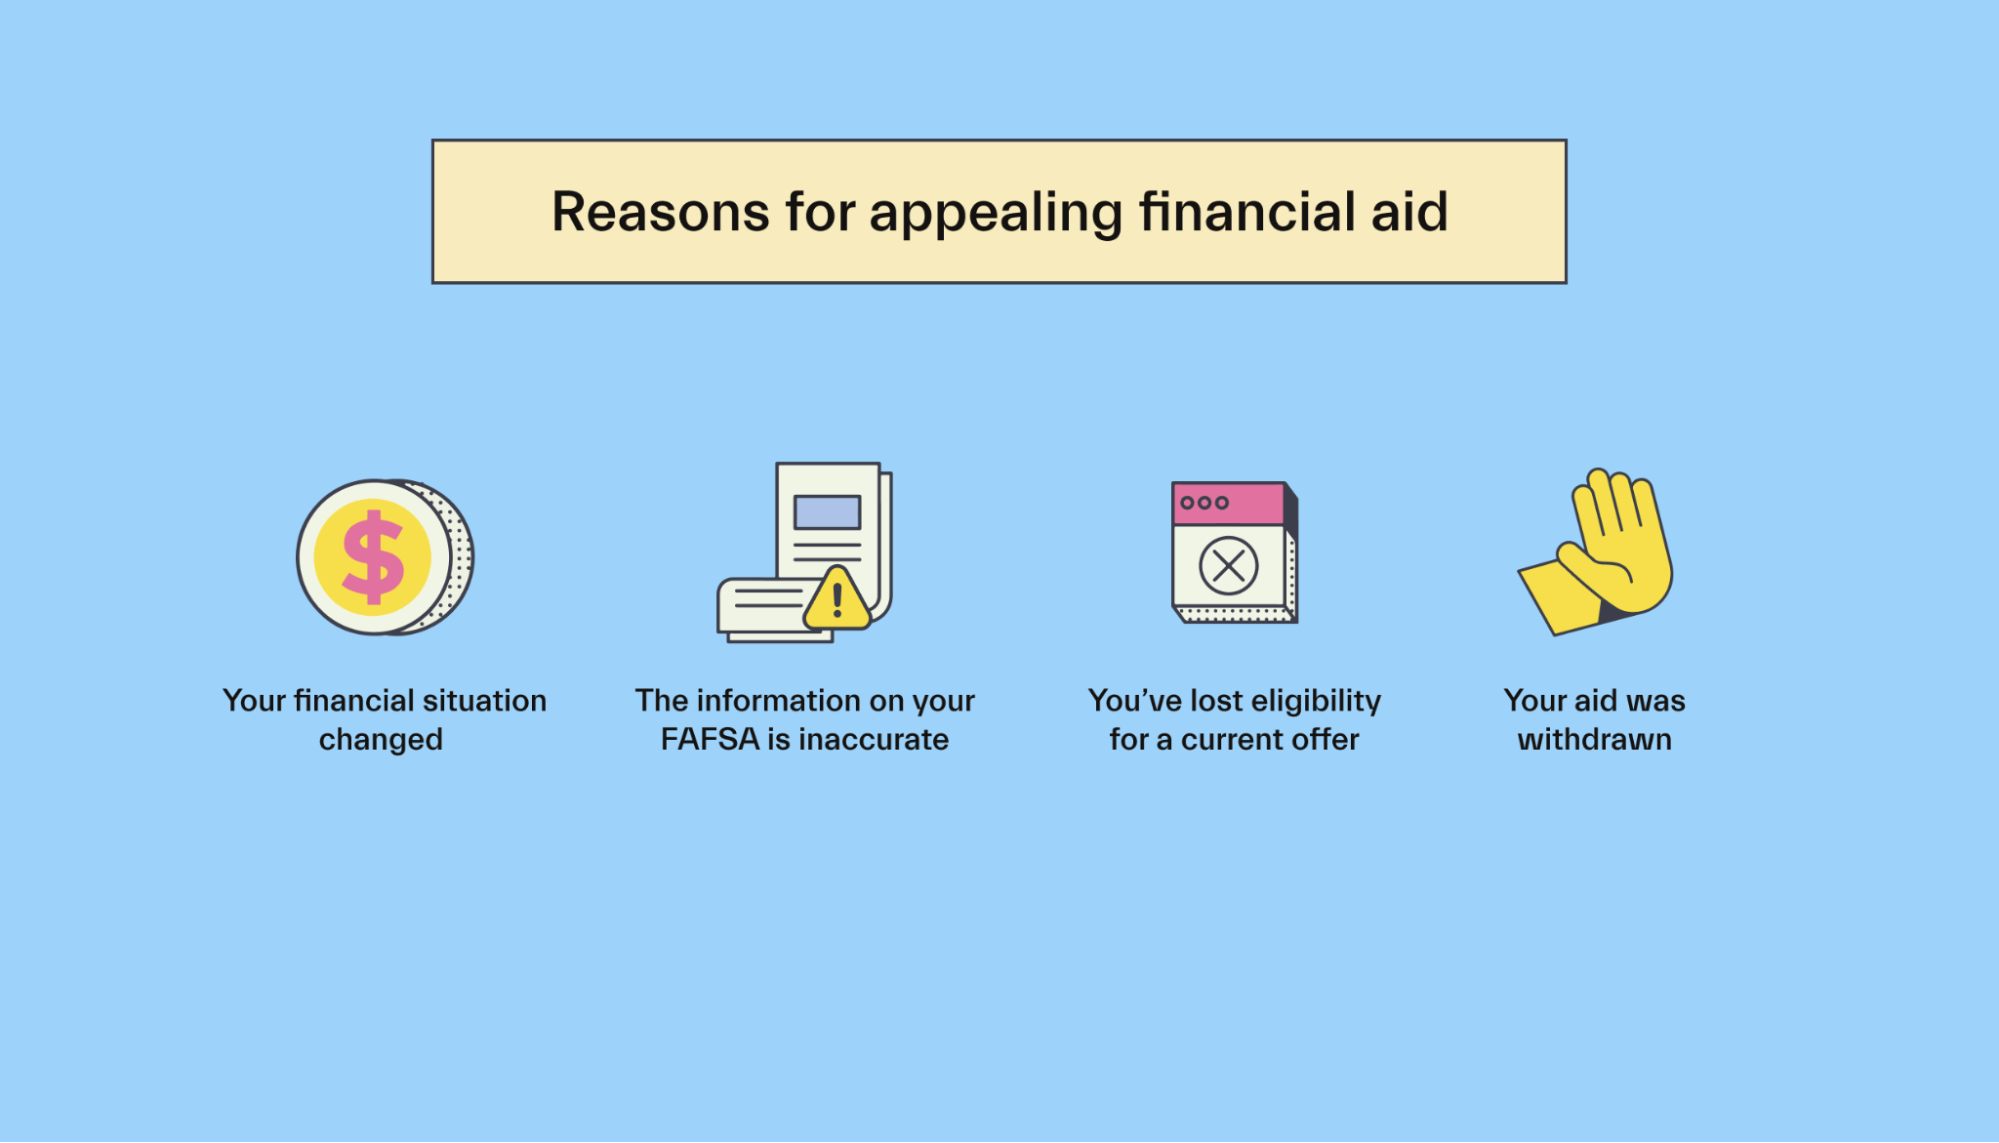 Reasons for appealing financial aid